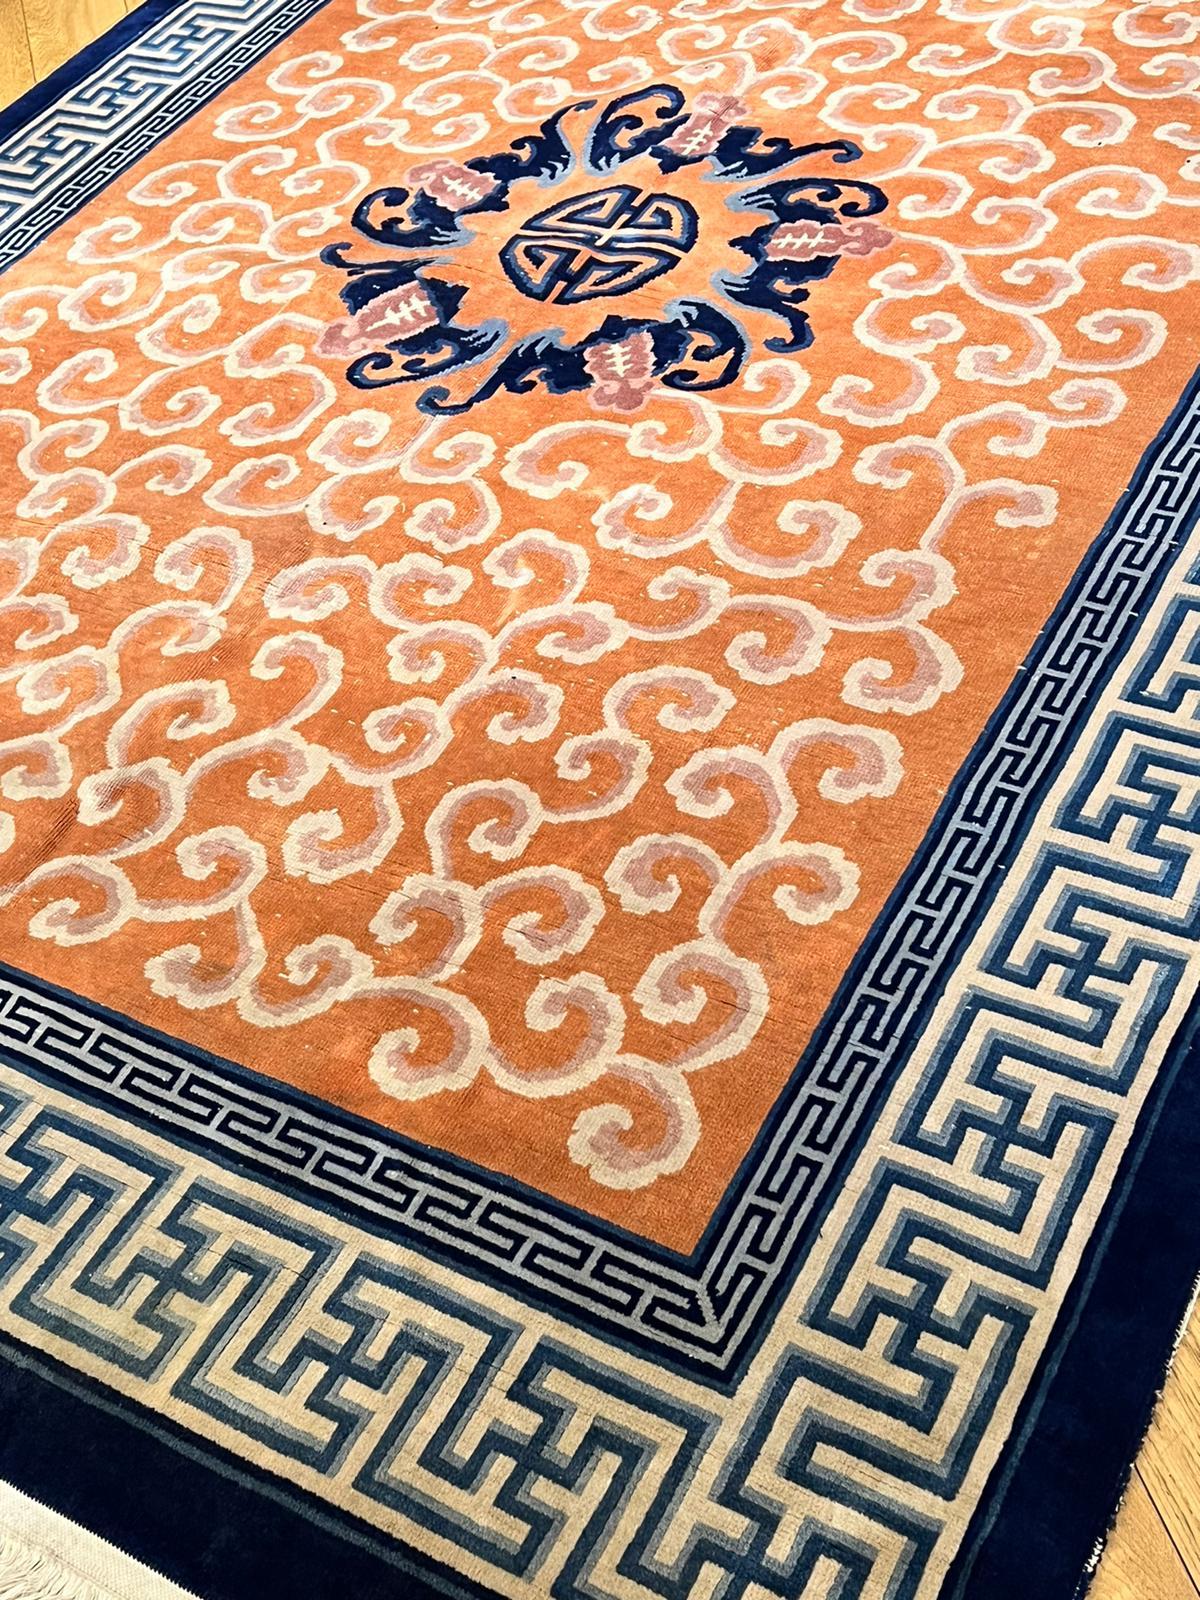 Red field Peking rug with white clouds and borders with continuous patterns in blue and white symbolise good luck and prosperity. A typical product of Chinese craftsmanship inspired by porcelain of the ancient Chinese dynasty.